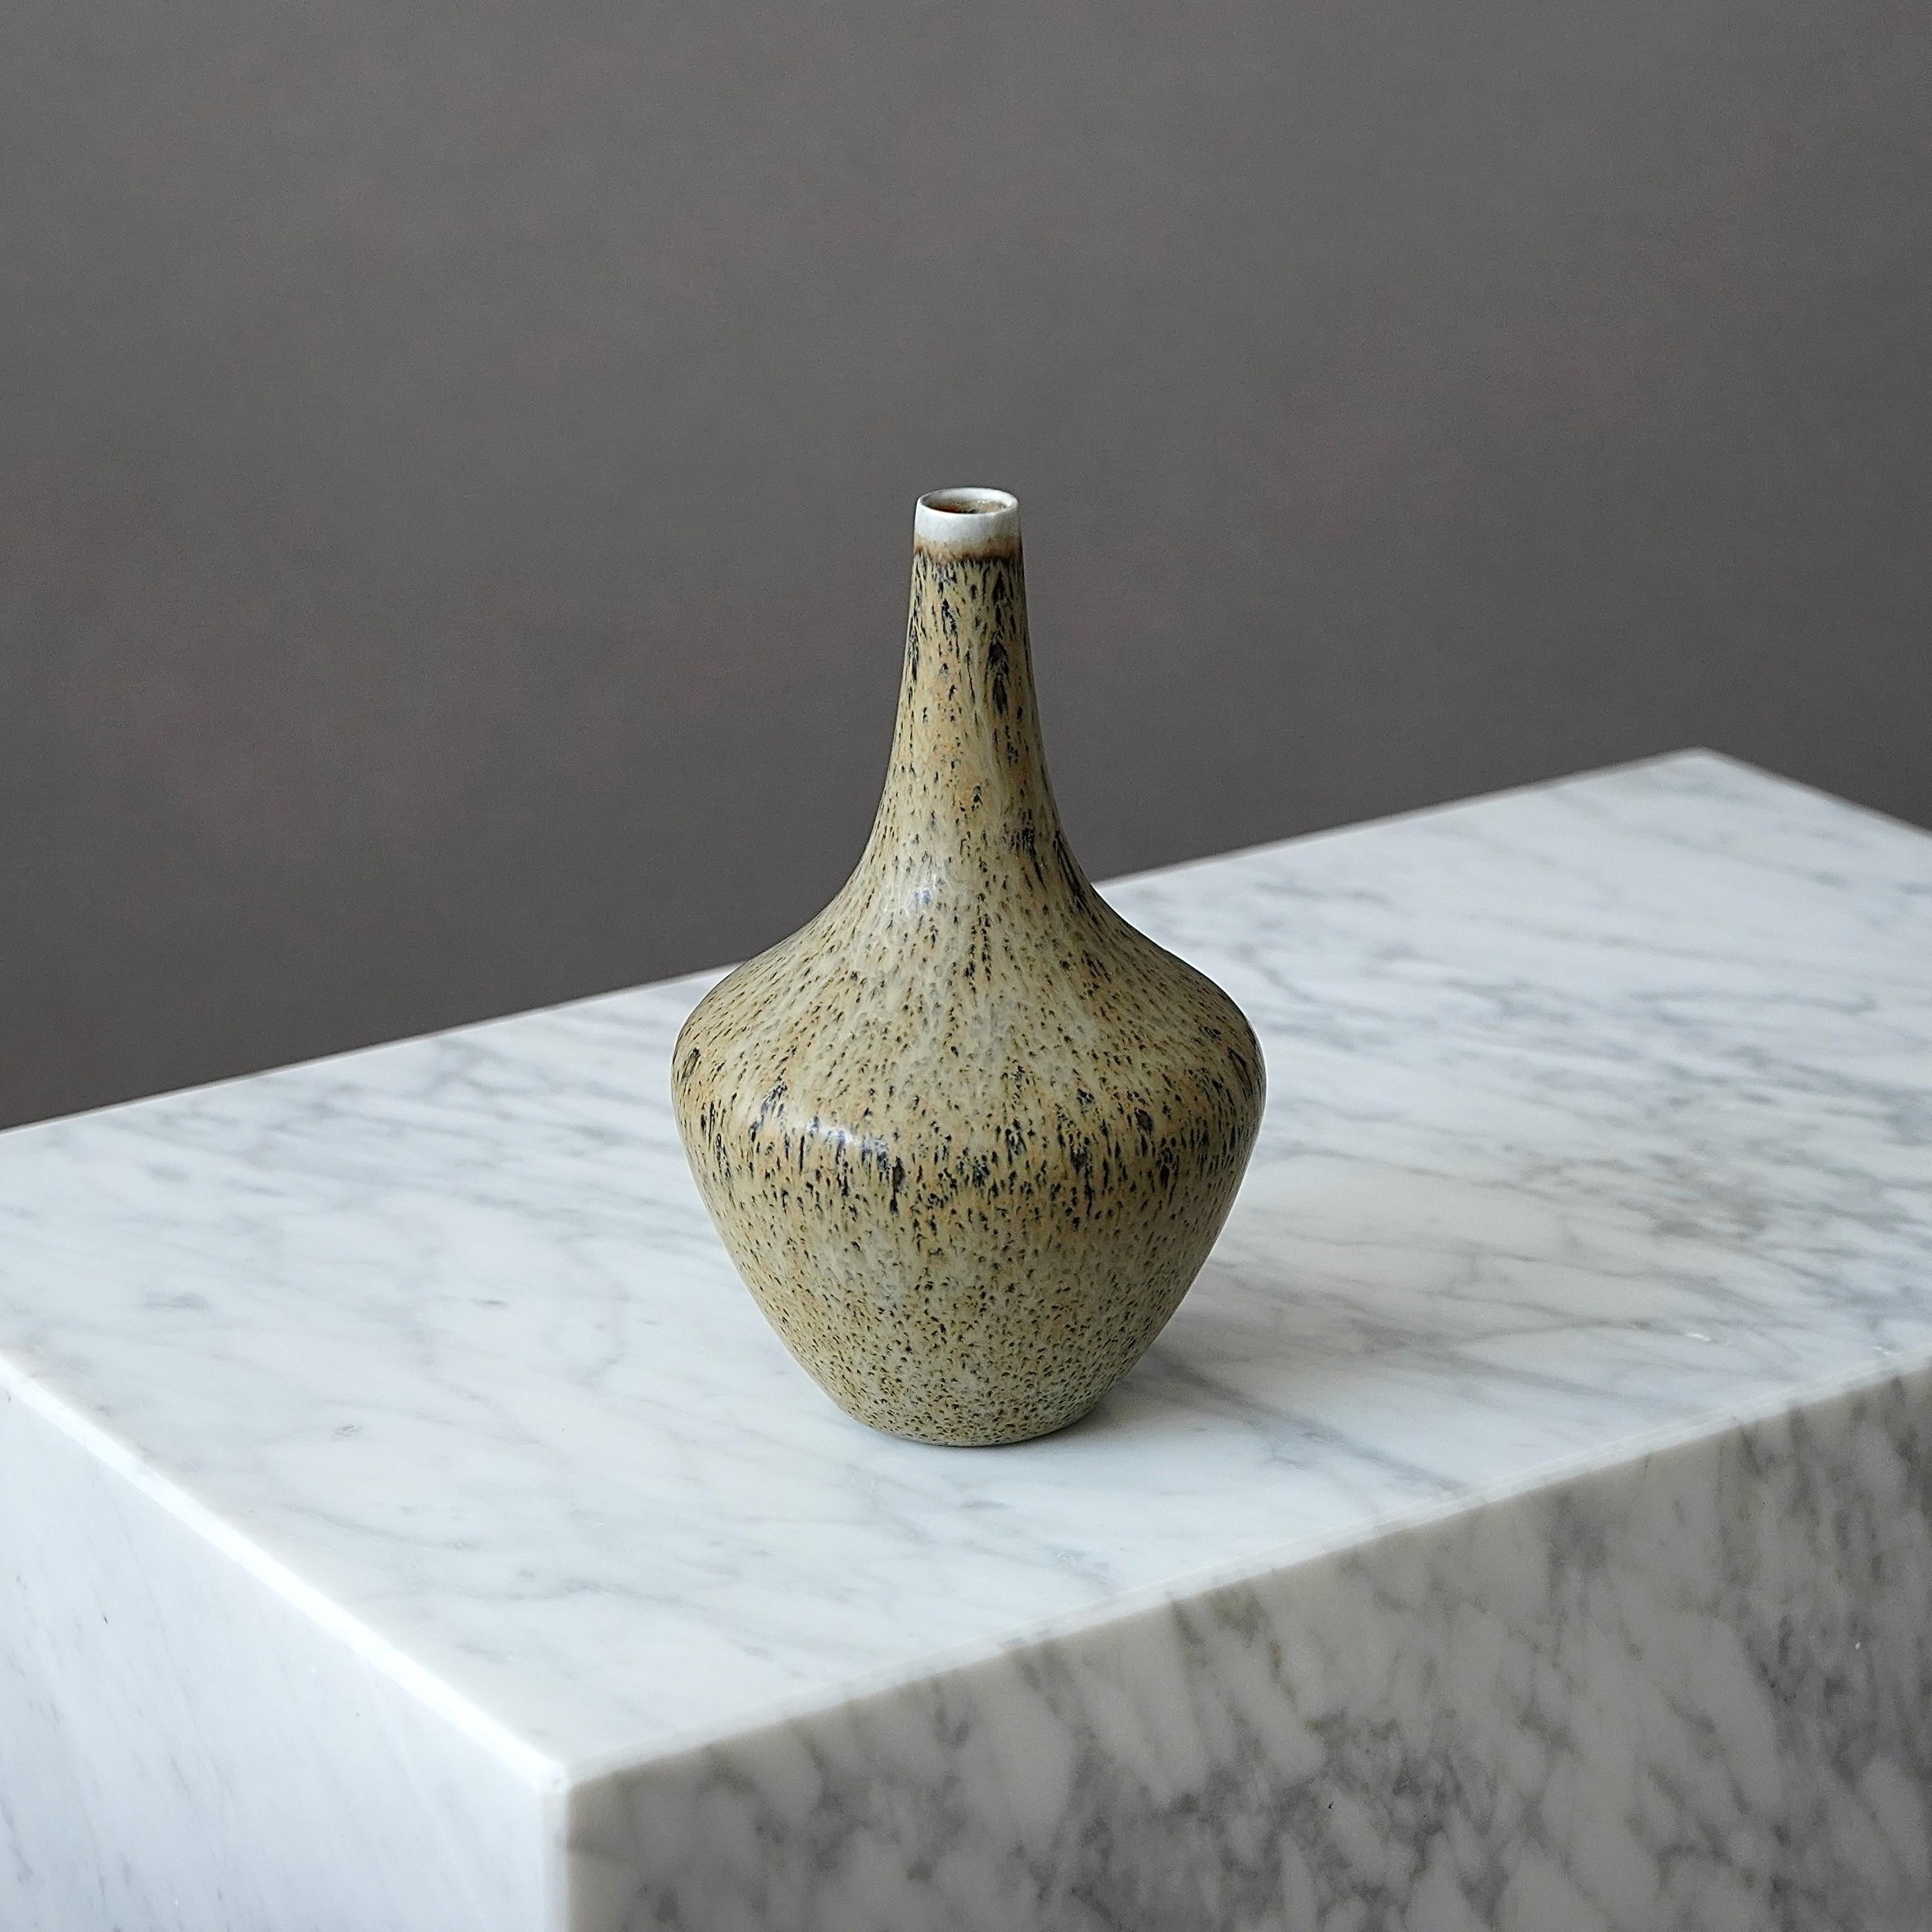 A beautiful stoneware vase with amazing glaze. 
Designed by Gunnar Nylund for Rorstrand, Sweden, 1950s.  

Good condition. Marked as second due to an irregularity in the glaze (from production).
Incised signature 